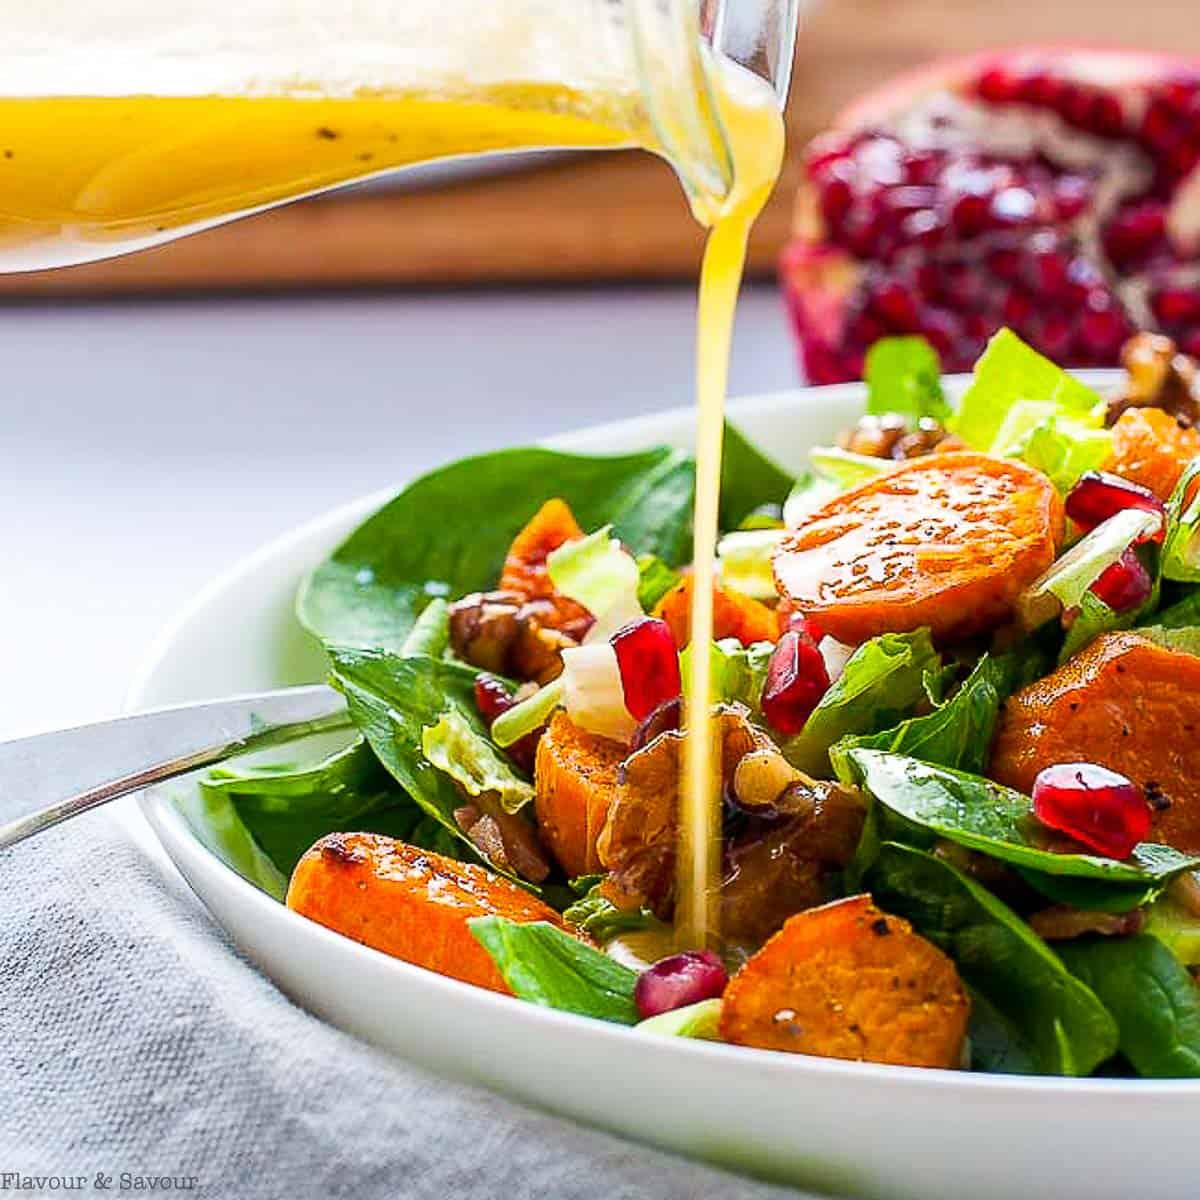 pouring hone-dijon vinaigrette on spinach salad with roasted sweet potatoes